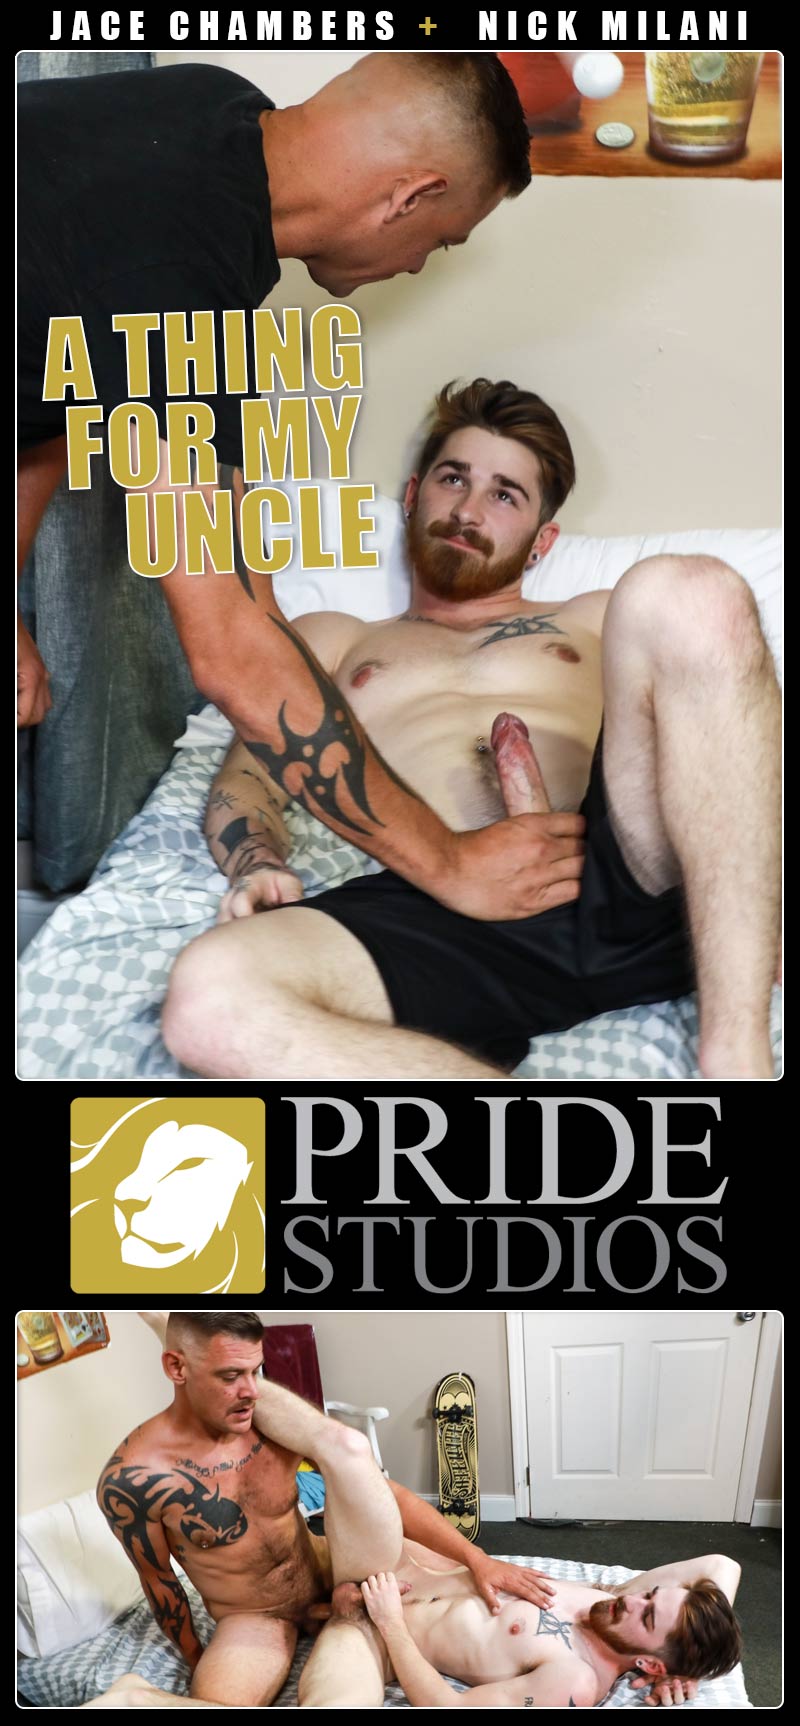 A Thing For My Uncle (Jace Chambers Fucks Nick Milani) at PrideStudios.com